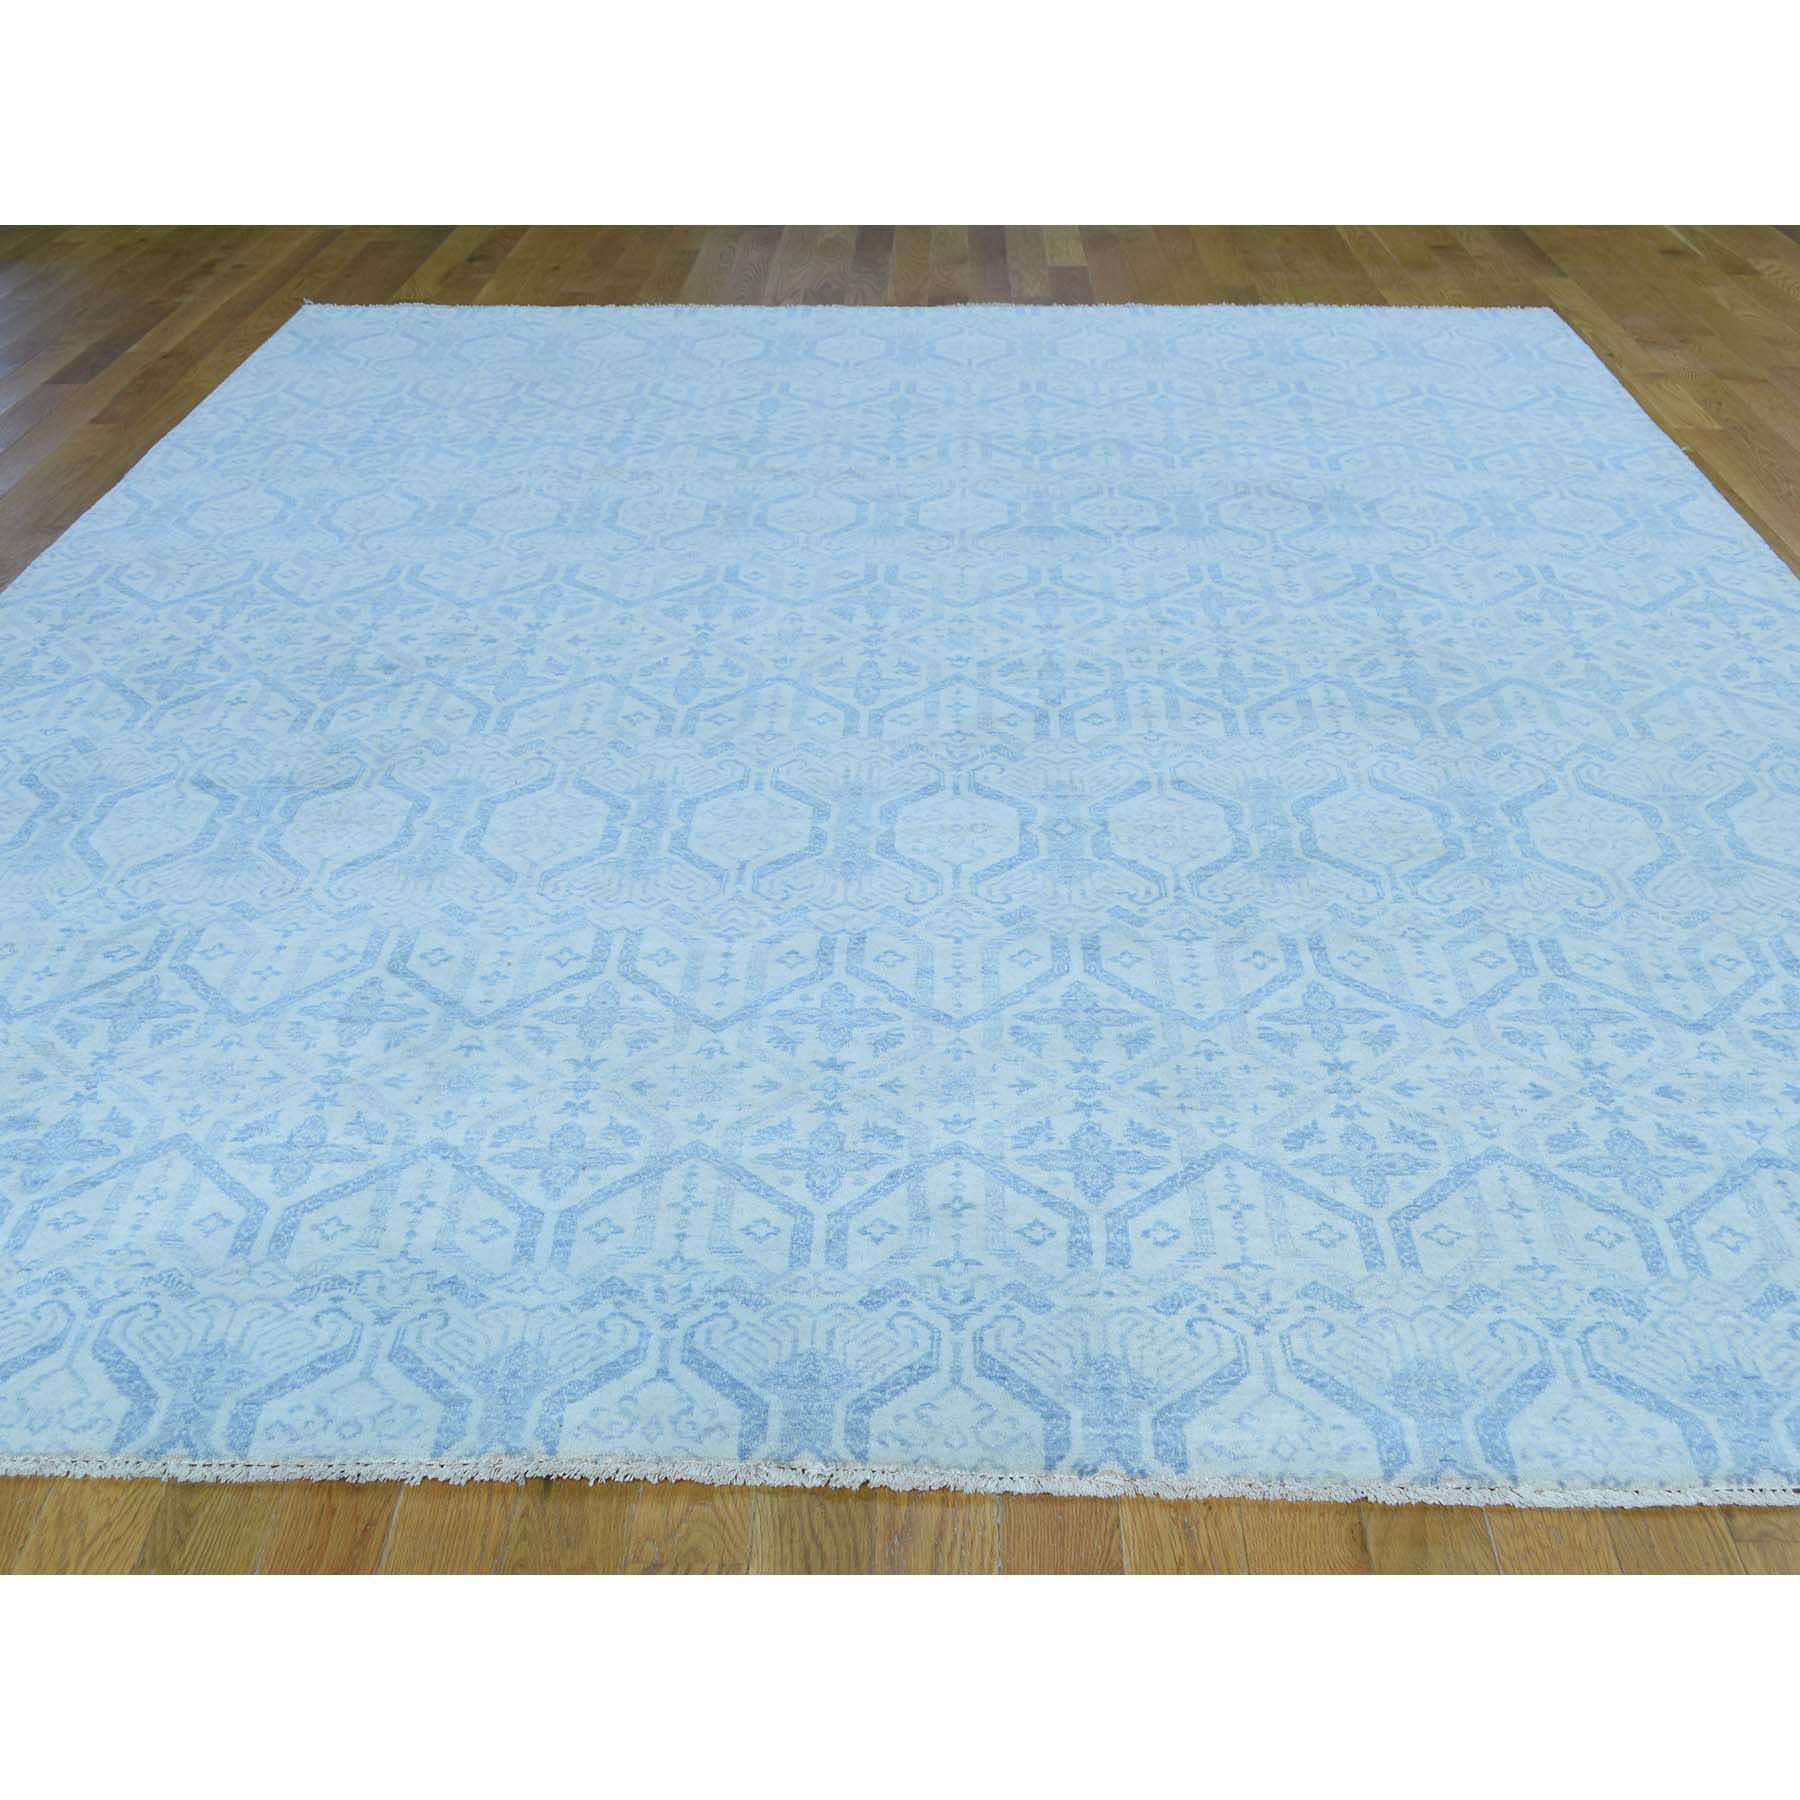 8-1 x10-2  Hand-Knotted 100 Percent Wool Ikat Design Dense Weave Oriental Rug 